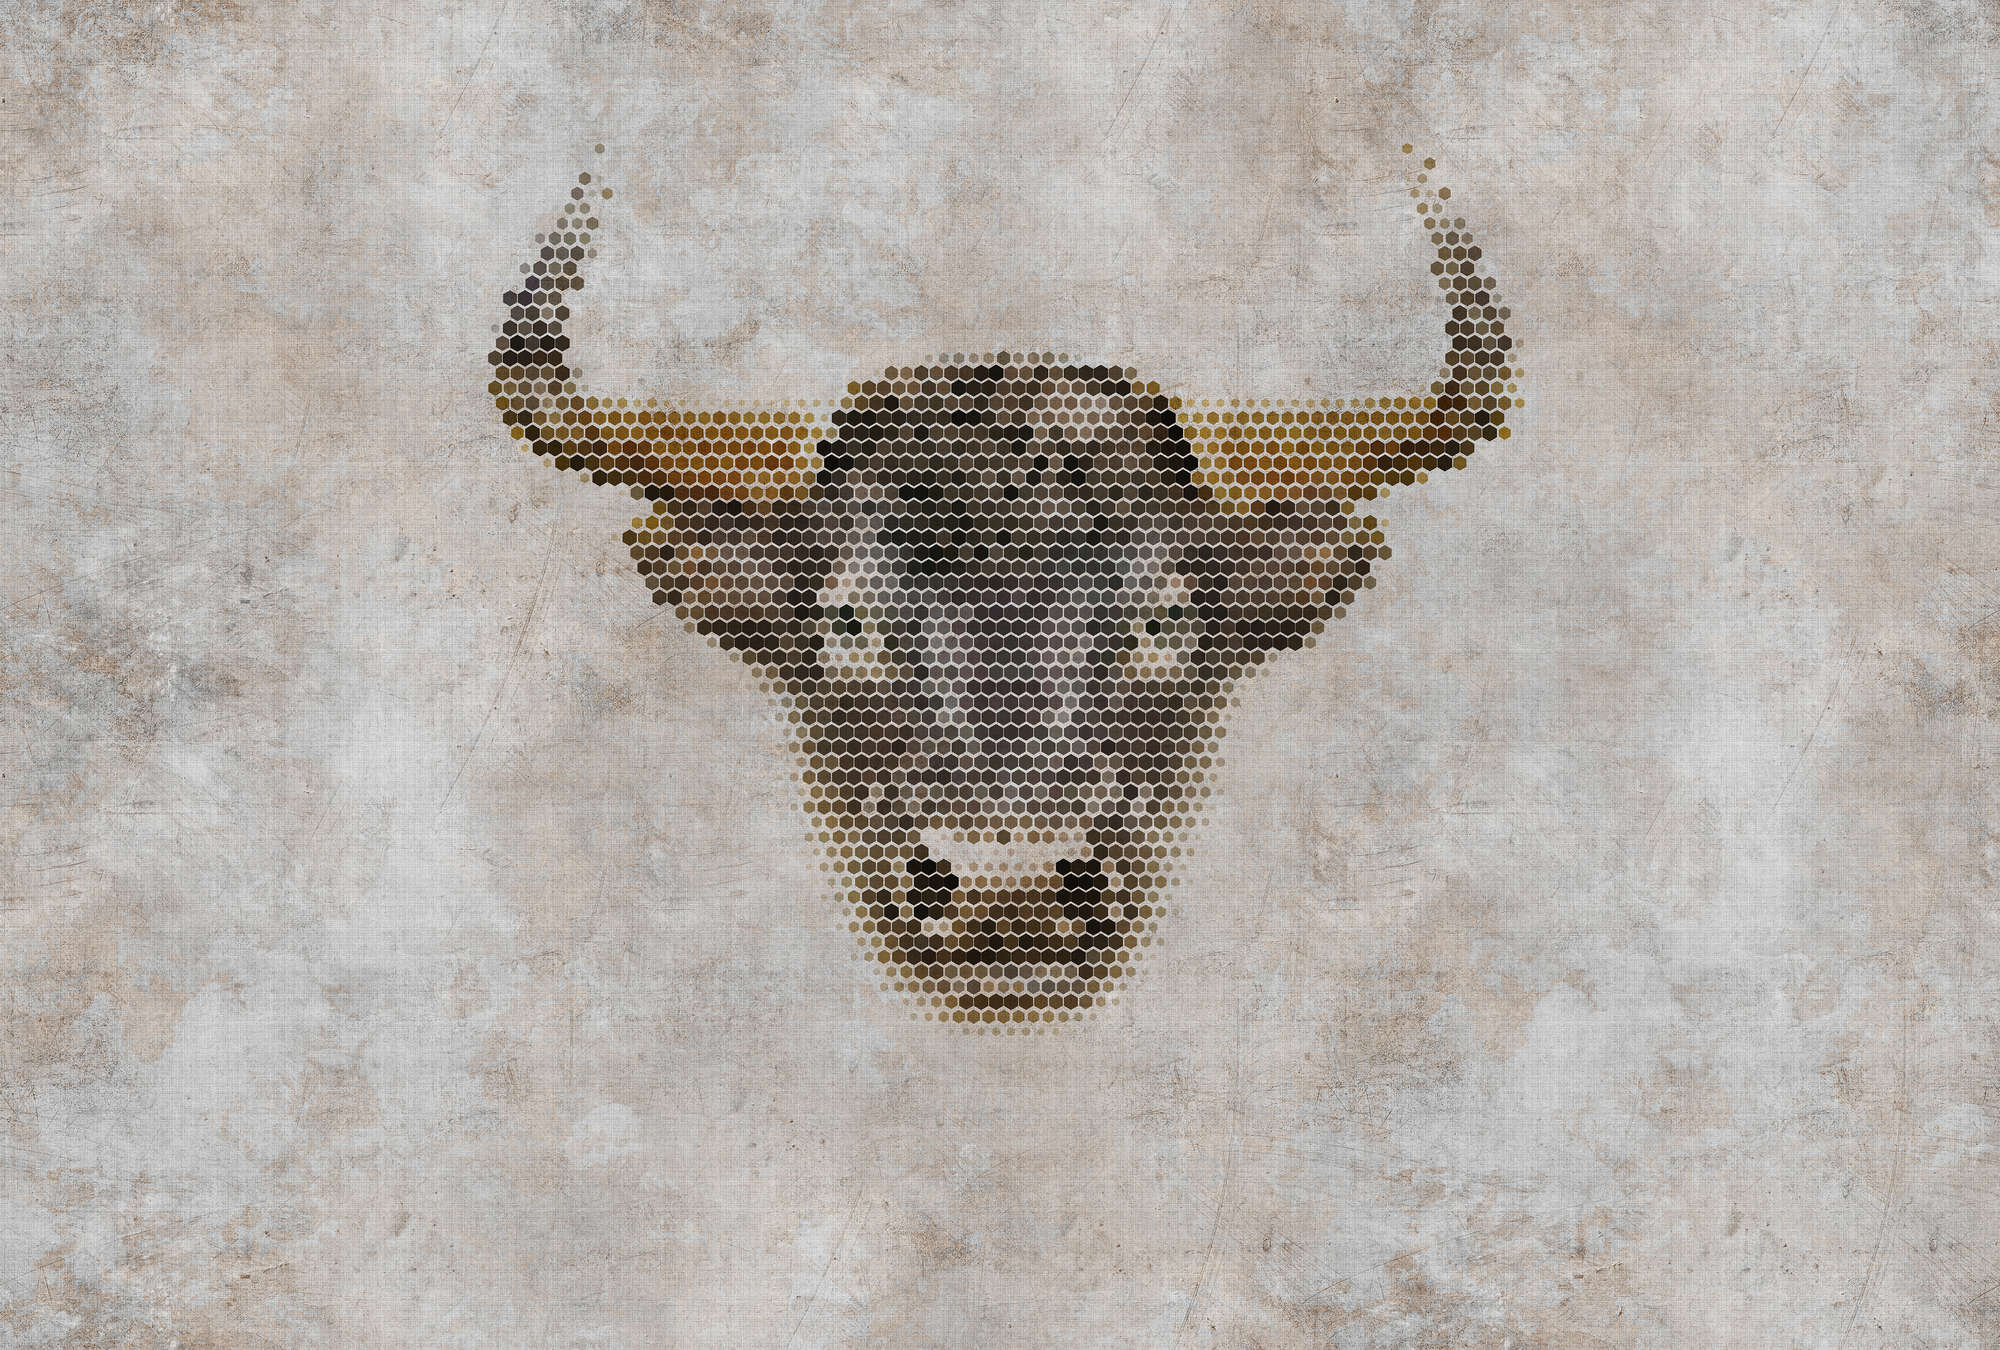             Big three 2 - digital print wallpaper, natural linen structure in concrete look with buffalo - beige, brown | structure non-woven
        